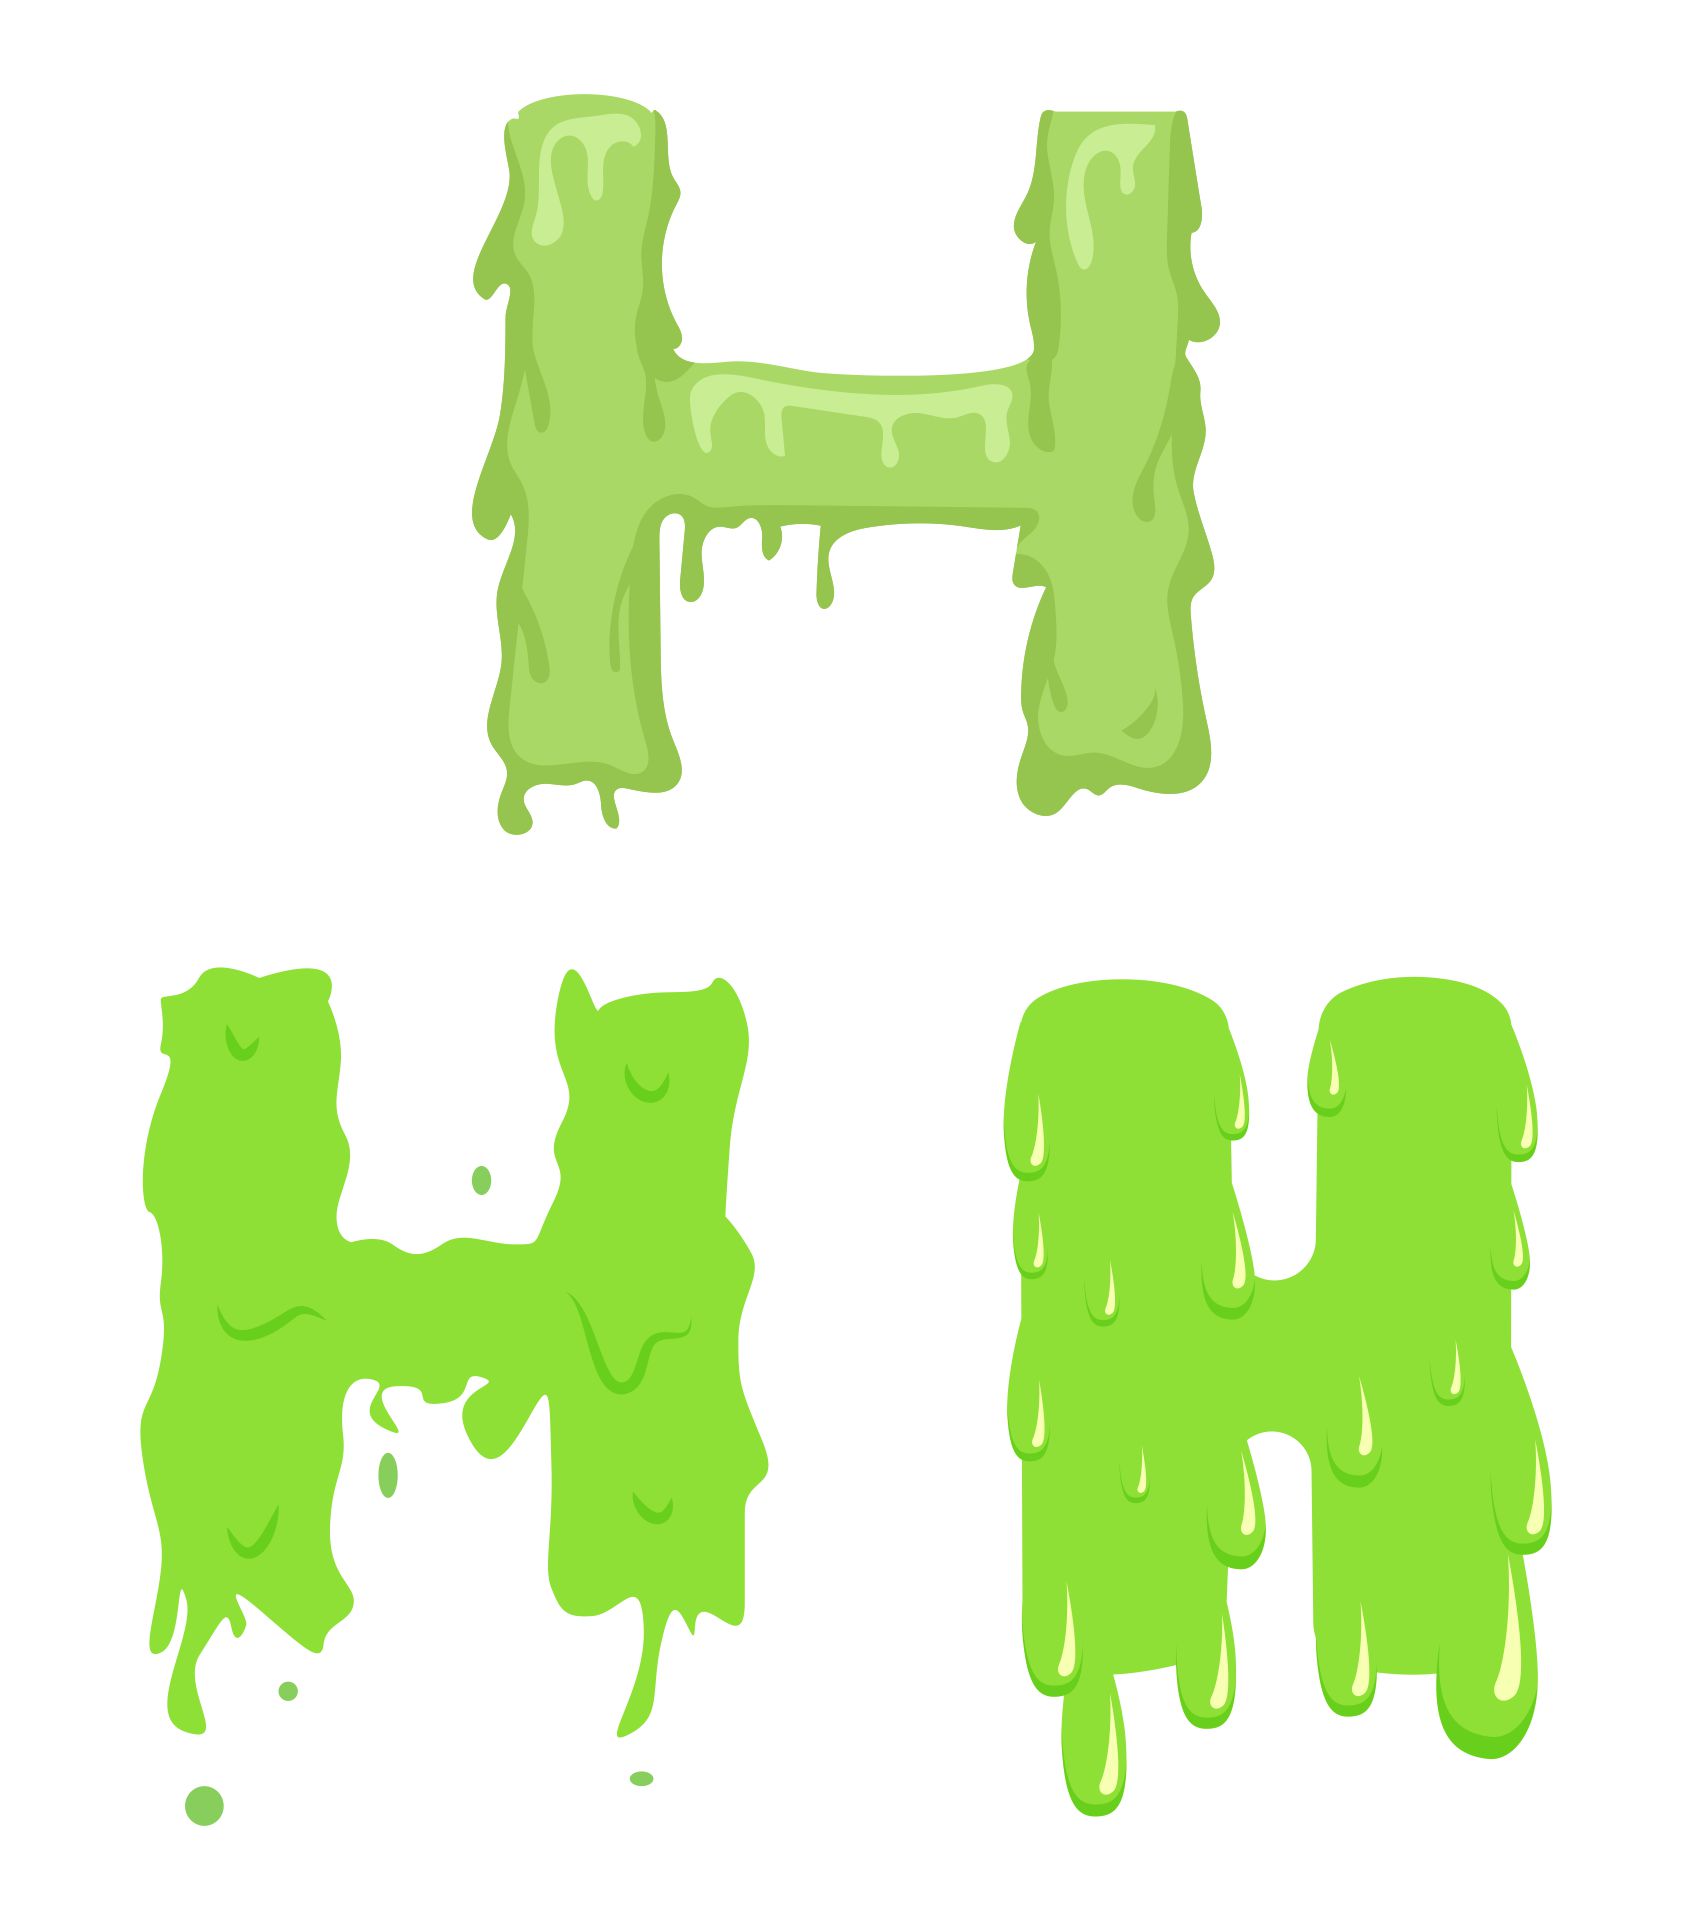 Green Dripping Slime Halloween Capital Letter H